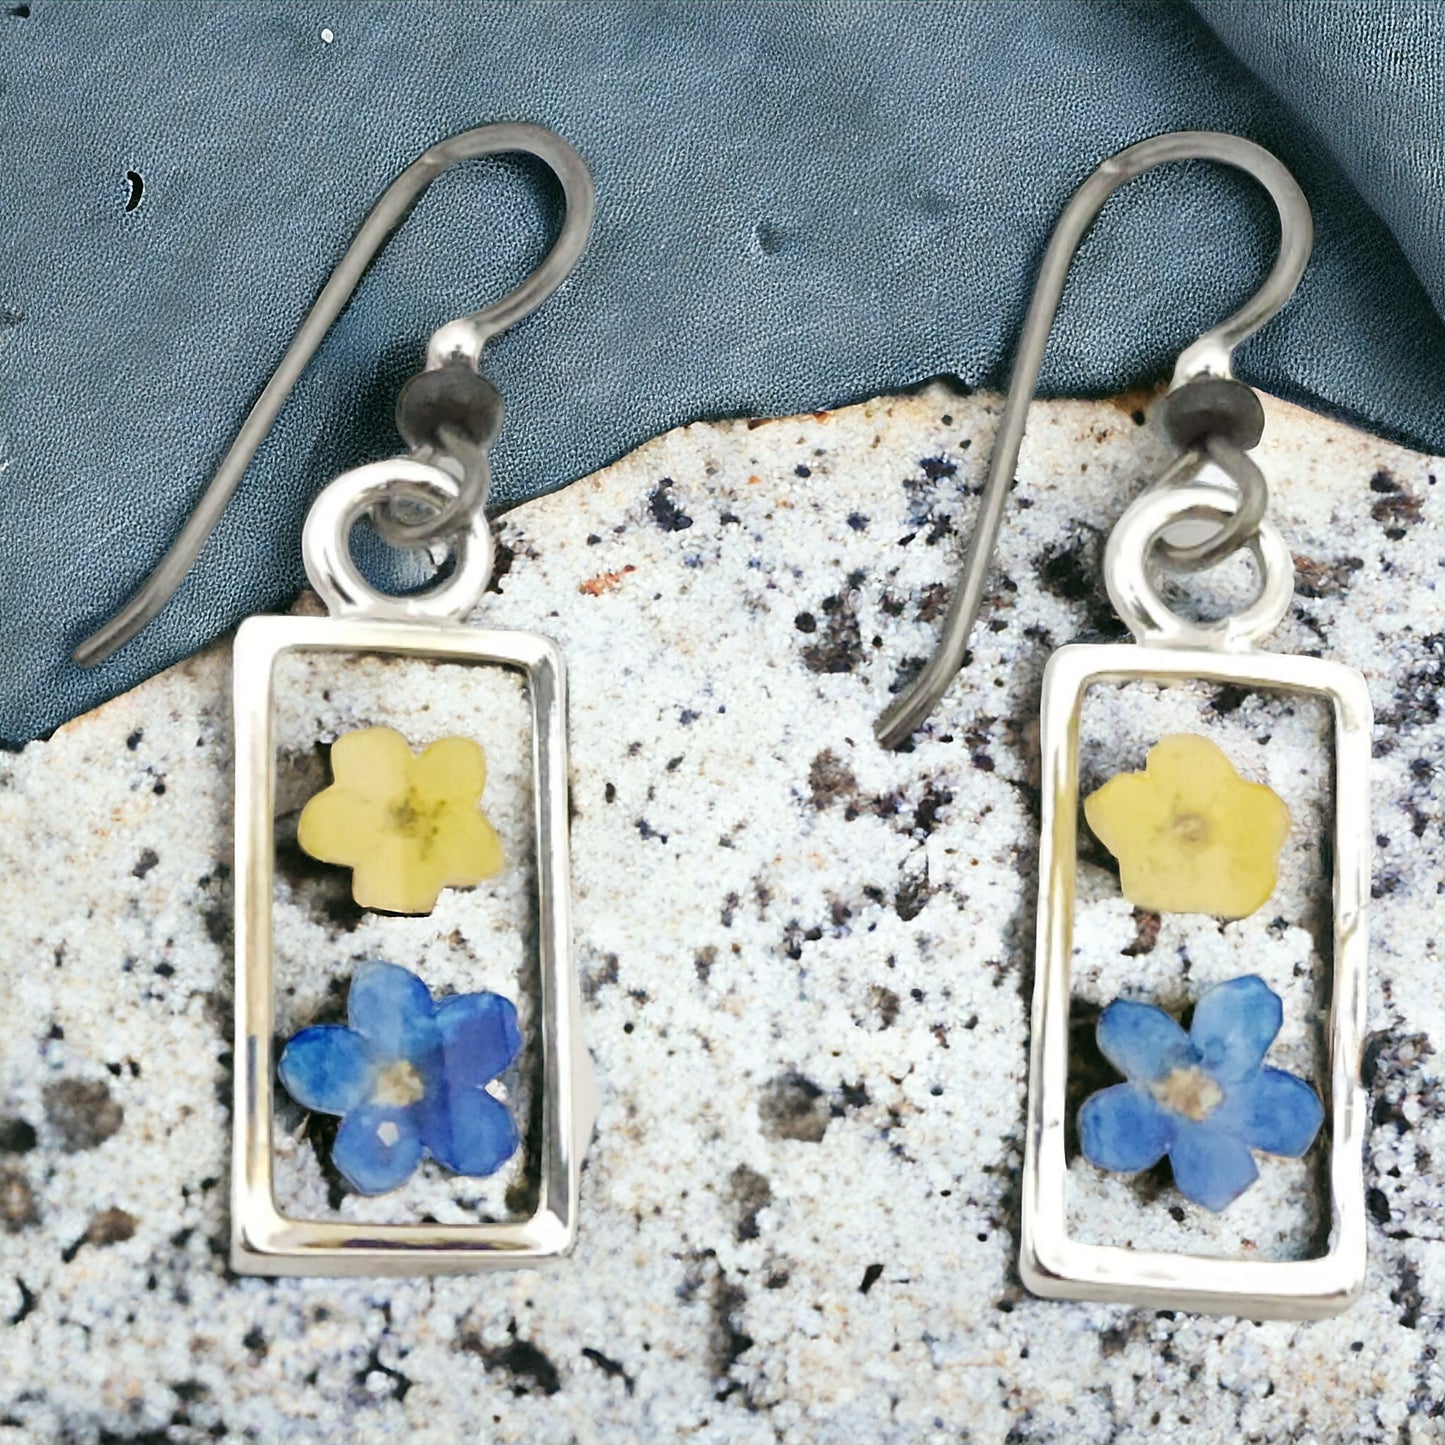 Forget-me-not Blue and Yellow Flower Earrings In Small Silver  Bezel